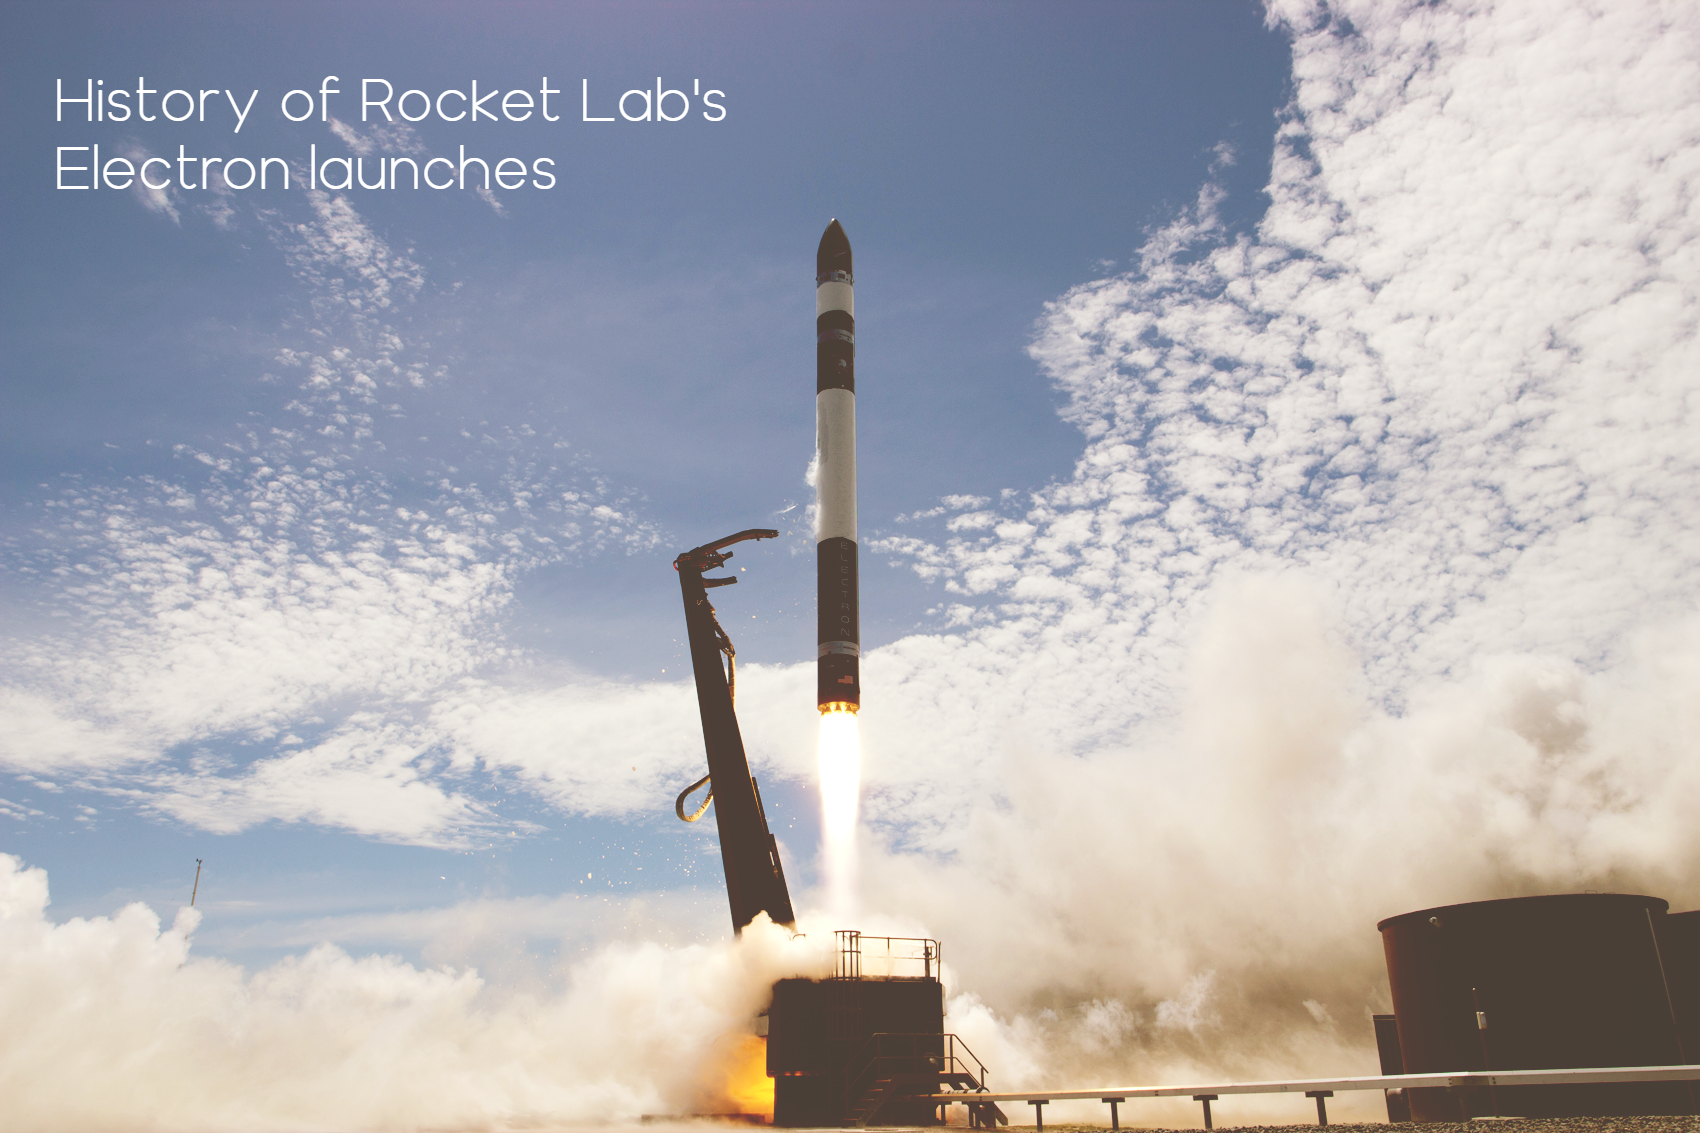 Rocket Lab’s Electron launch history